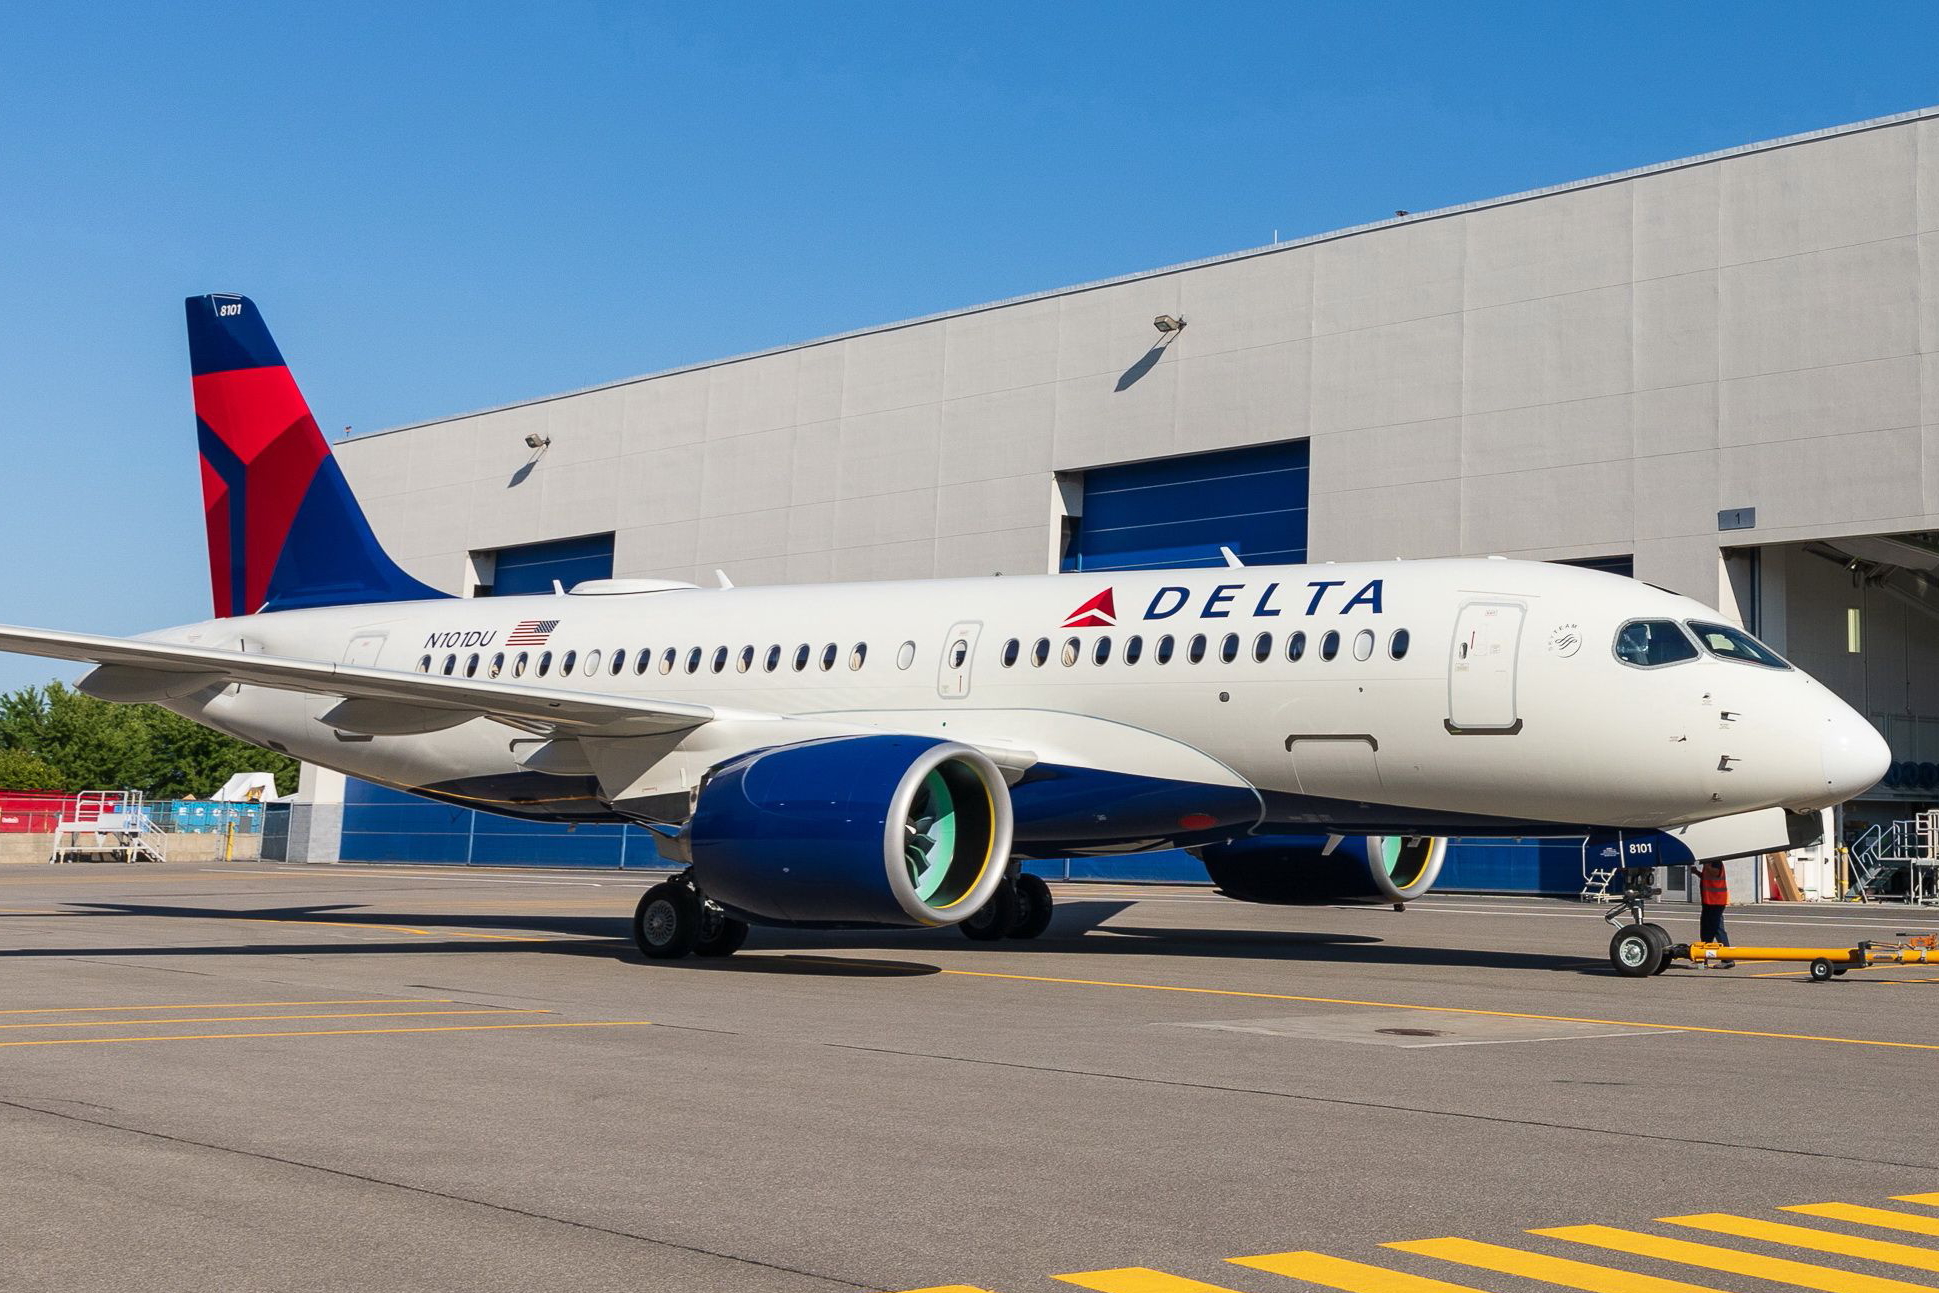 The initial Airbus A220-100 for Delta Air Lines – the first U.S. carrier that will receive an A220 jetliner – completed its painting at the A220 final assembly line in Mirabel, Québec, Canada. Click to enlarge.